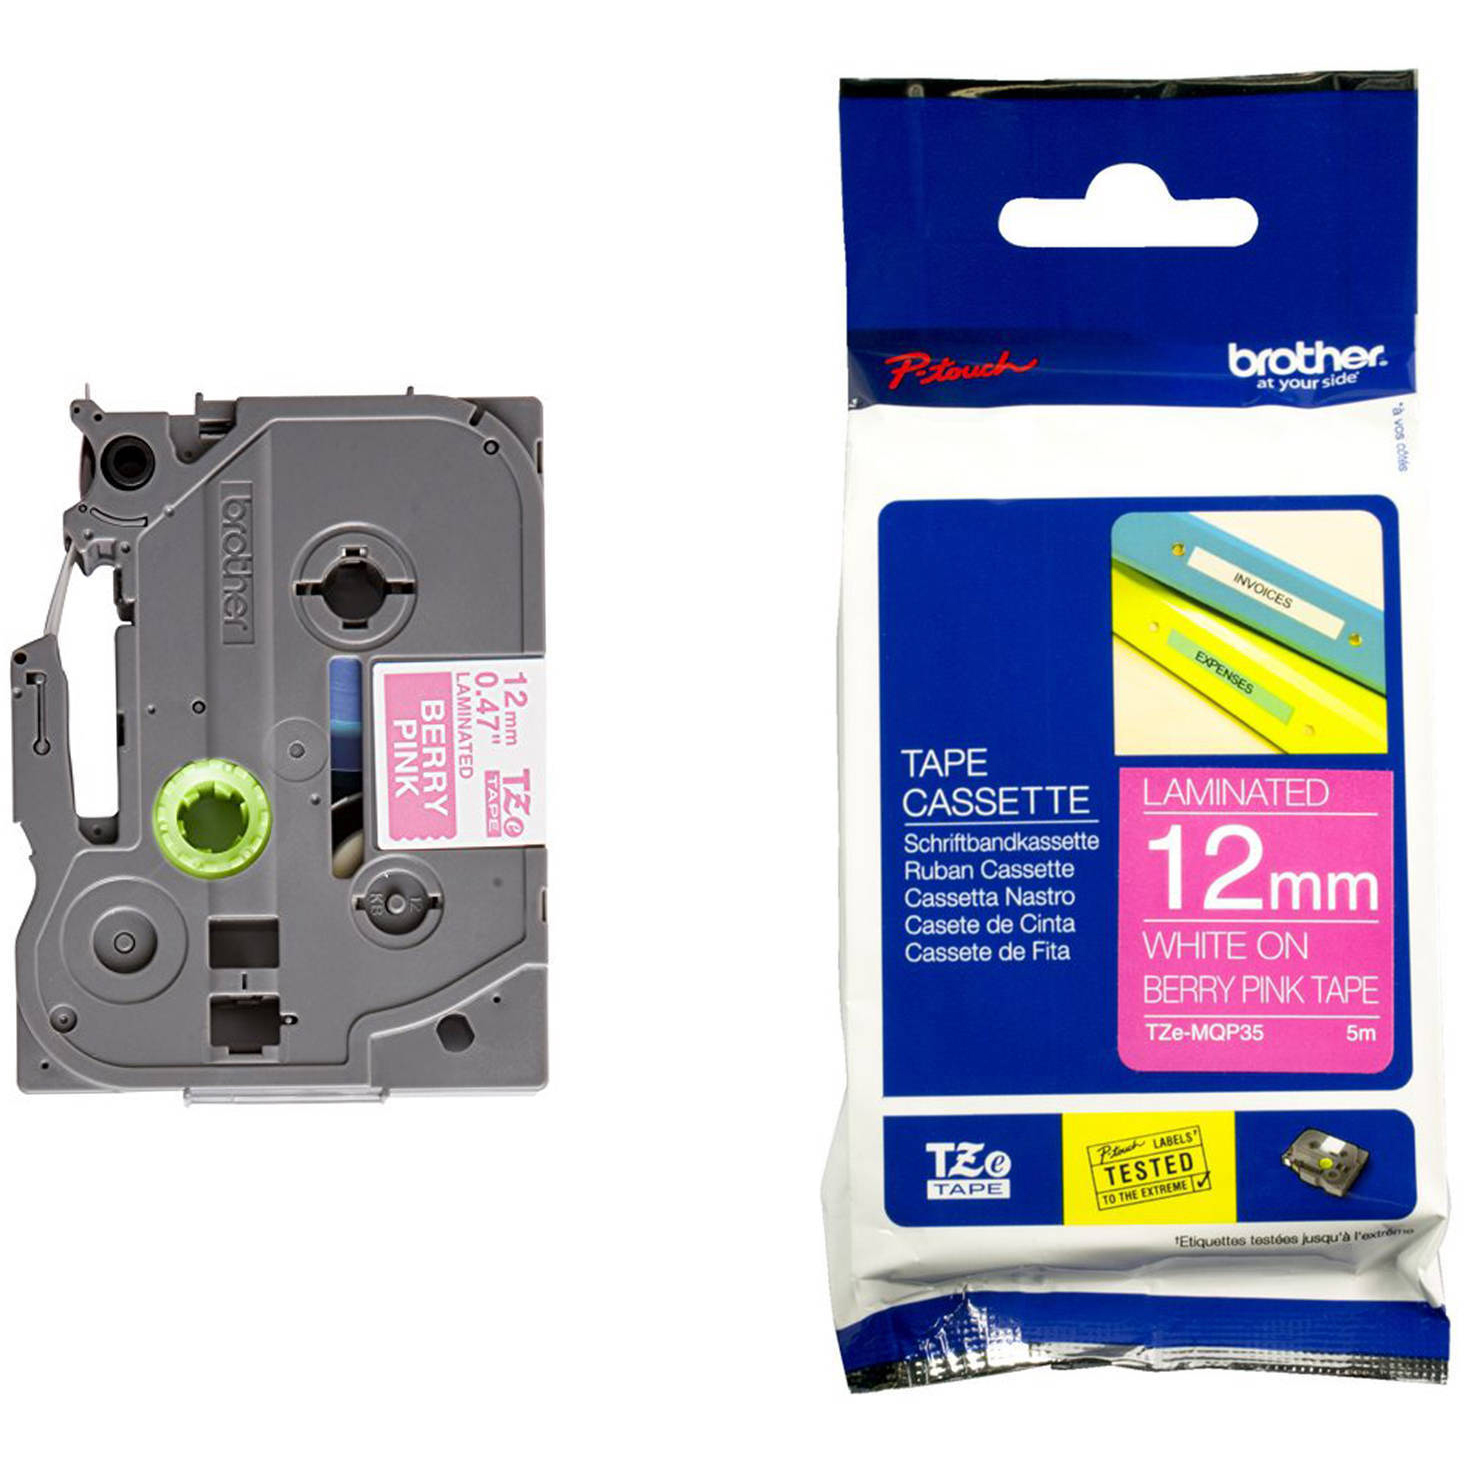 Original Brother TZeMQP35 White on Berry Pink 12mm x 5m Laminated P-Touch Label Tape (TZe-MQP35)